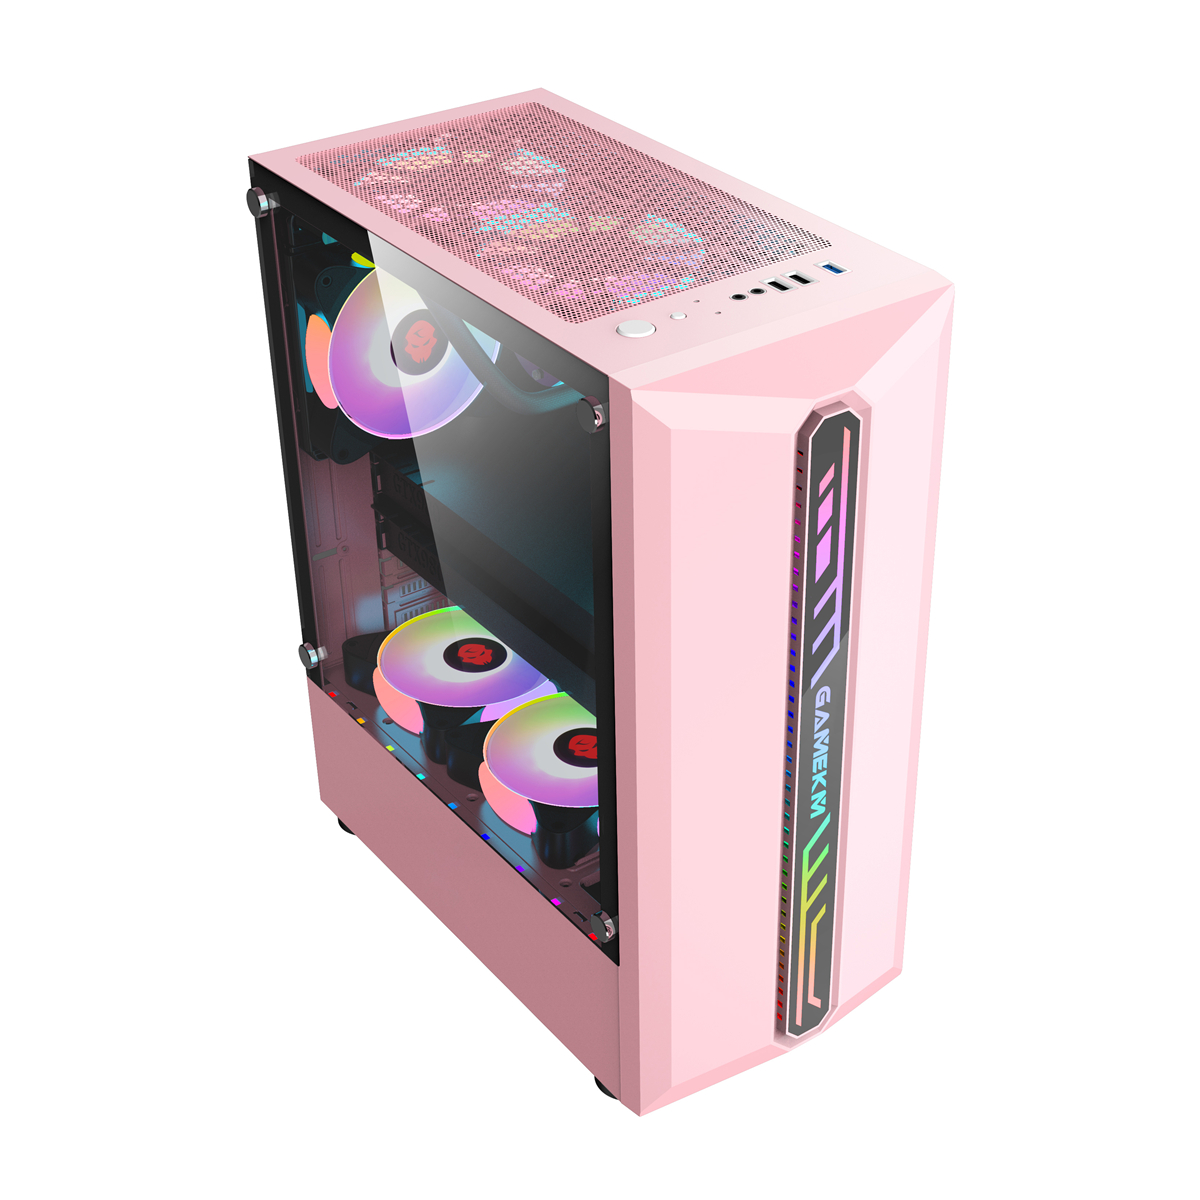 Find GAMEKM Computer Case Mid-Tower ATX/M-ATX/ITX Acrylic Side Panel RGB Gaming Computer PC Case USB 3.0/USB 2.0/HDD/SSD for Desktop PC Computer for Sale on Gipsybee.com with cryptocurrencies